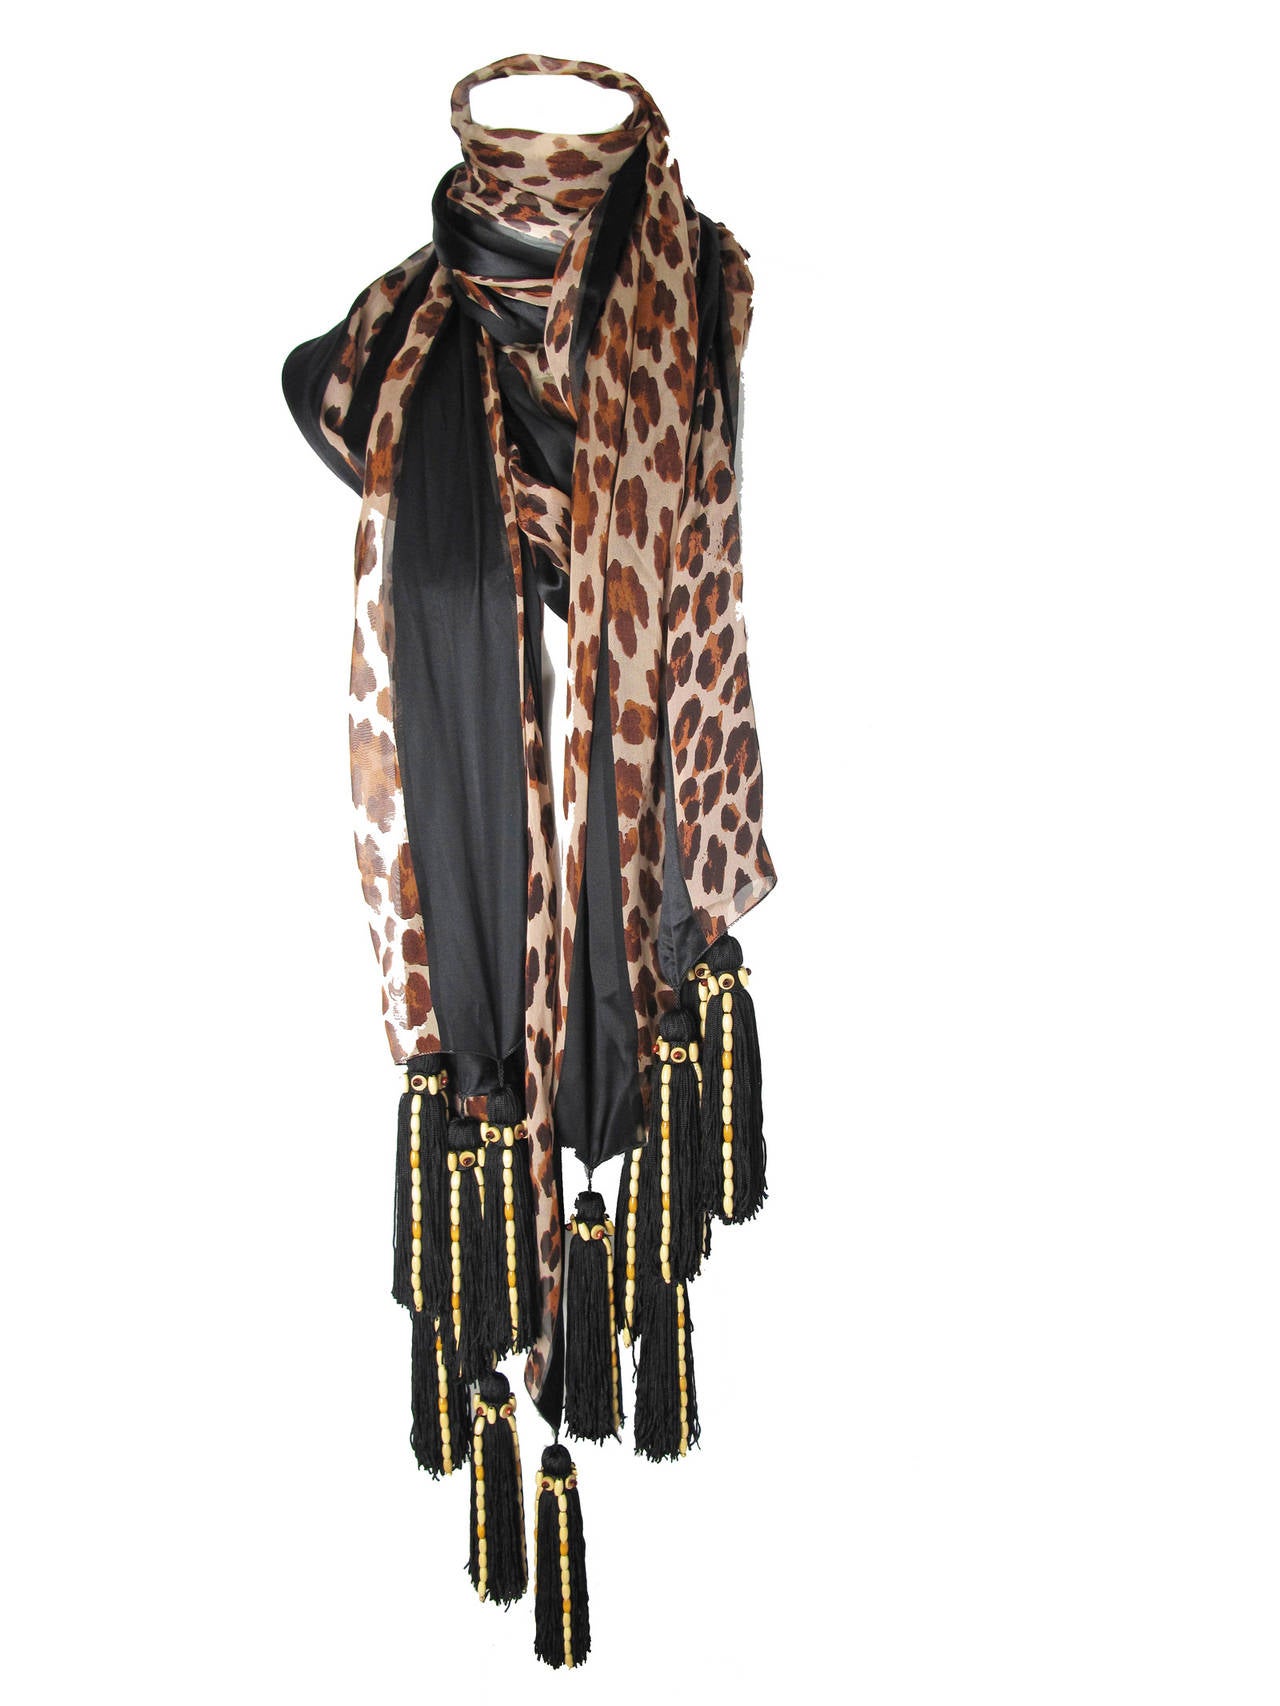 1980s Christian Dior sheer chiffon black and leopard wrap with tassels and beading.  6